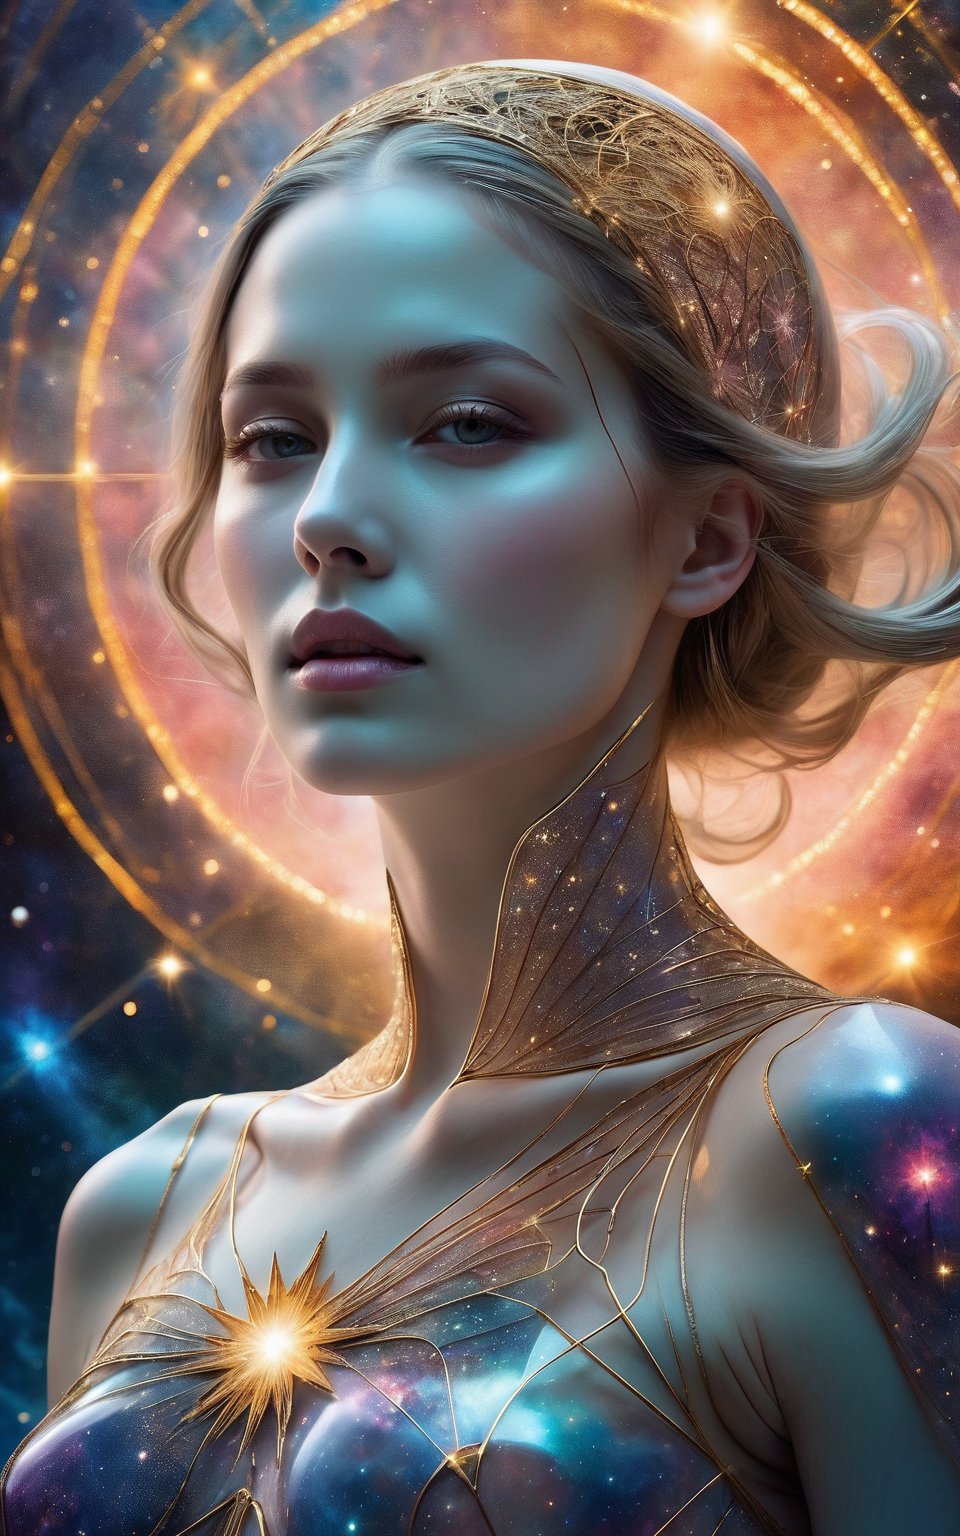 (best quality,8K,highres,masterpiece), ultra-detailed, featuring a woman with her face obscured by a grey square, set against a cosmic, star-filled background. The woman appears to be wearing or integrated with an intricate skeletal structure that is white and somewhat luminescent. The cosmic backdrop bathes the scene in a mesmerizing array of stars and galaxies, creating a sense of vastness and wonder. The obscured face adds an air of mystery and intrigue, inviting viewers to ponder the hidden depths of the character's identity. Meanwhile, the intricate skeletal structure adds a touch of ethereal beauty and symbolism, hinting at themes of mortality, transformation, and the interconnectedness of all things. This artwork is a captivating exploration of the human form amidst the cosmic expanse, blending elements of mystery, beauty, and cosmic wonder.